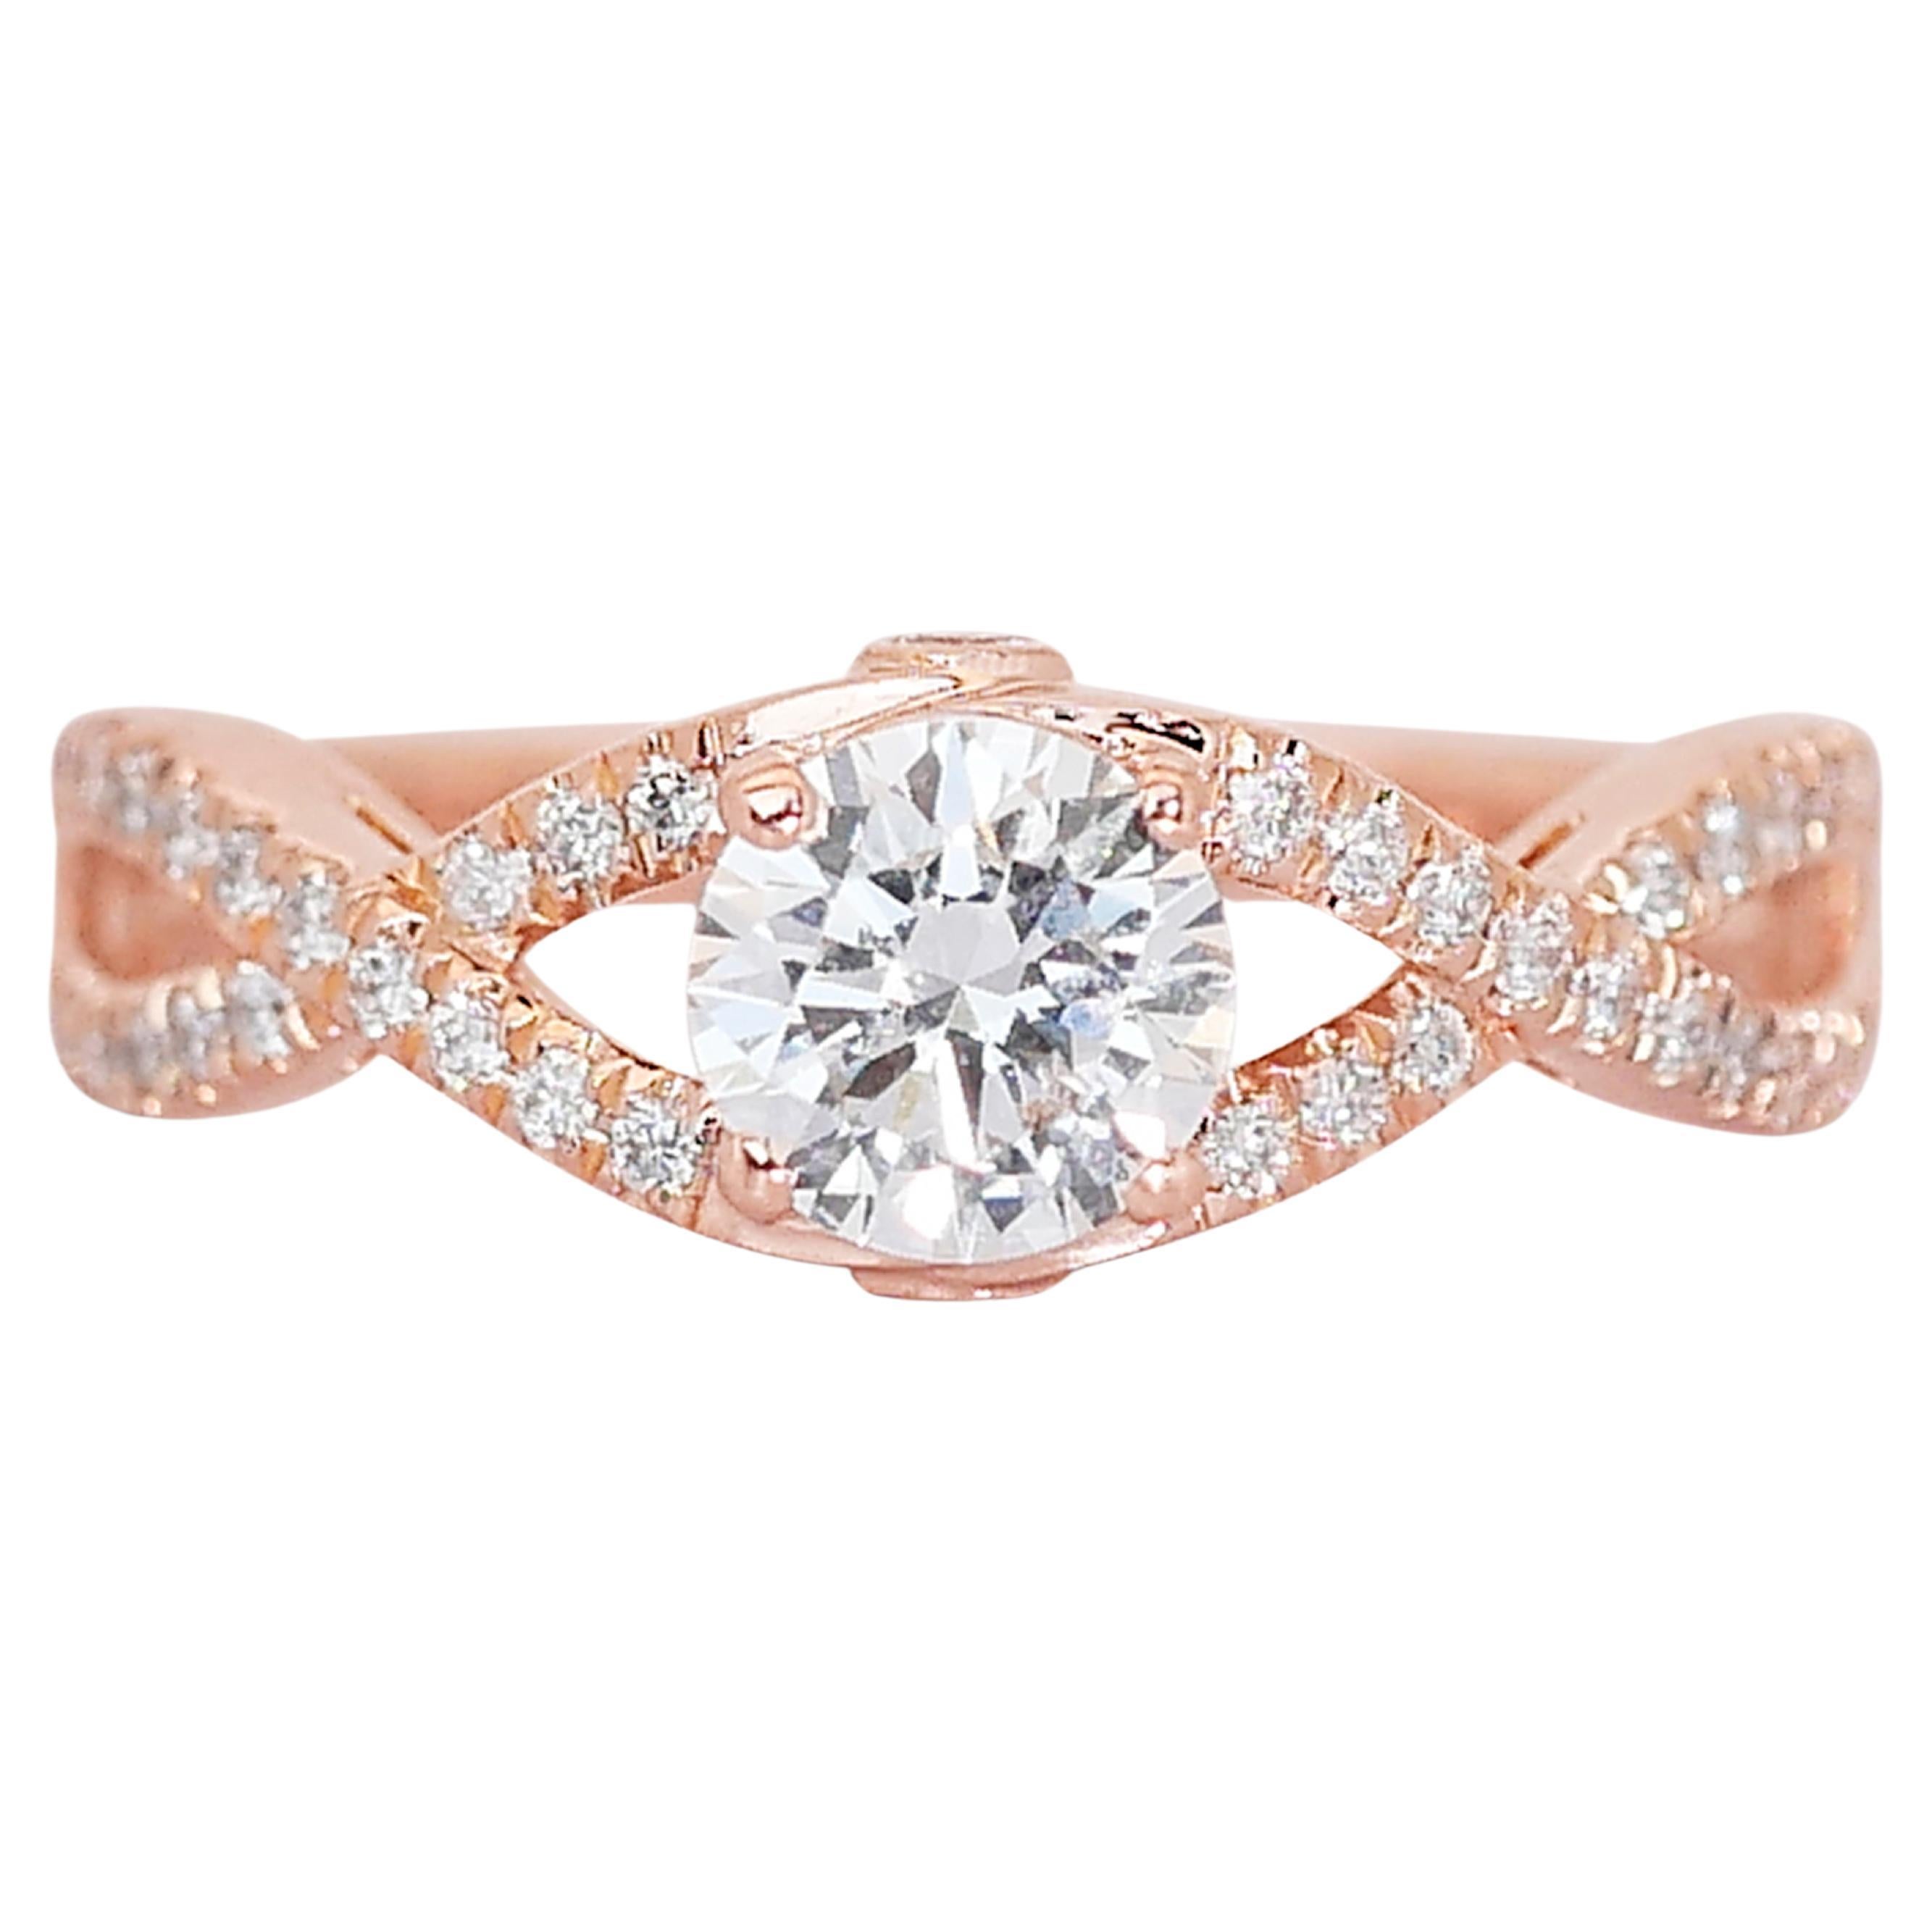 Beautiful 18K Rose Gold Infinity Natural Diamond Ring w/0.91ct - GIA Certified For Sale